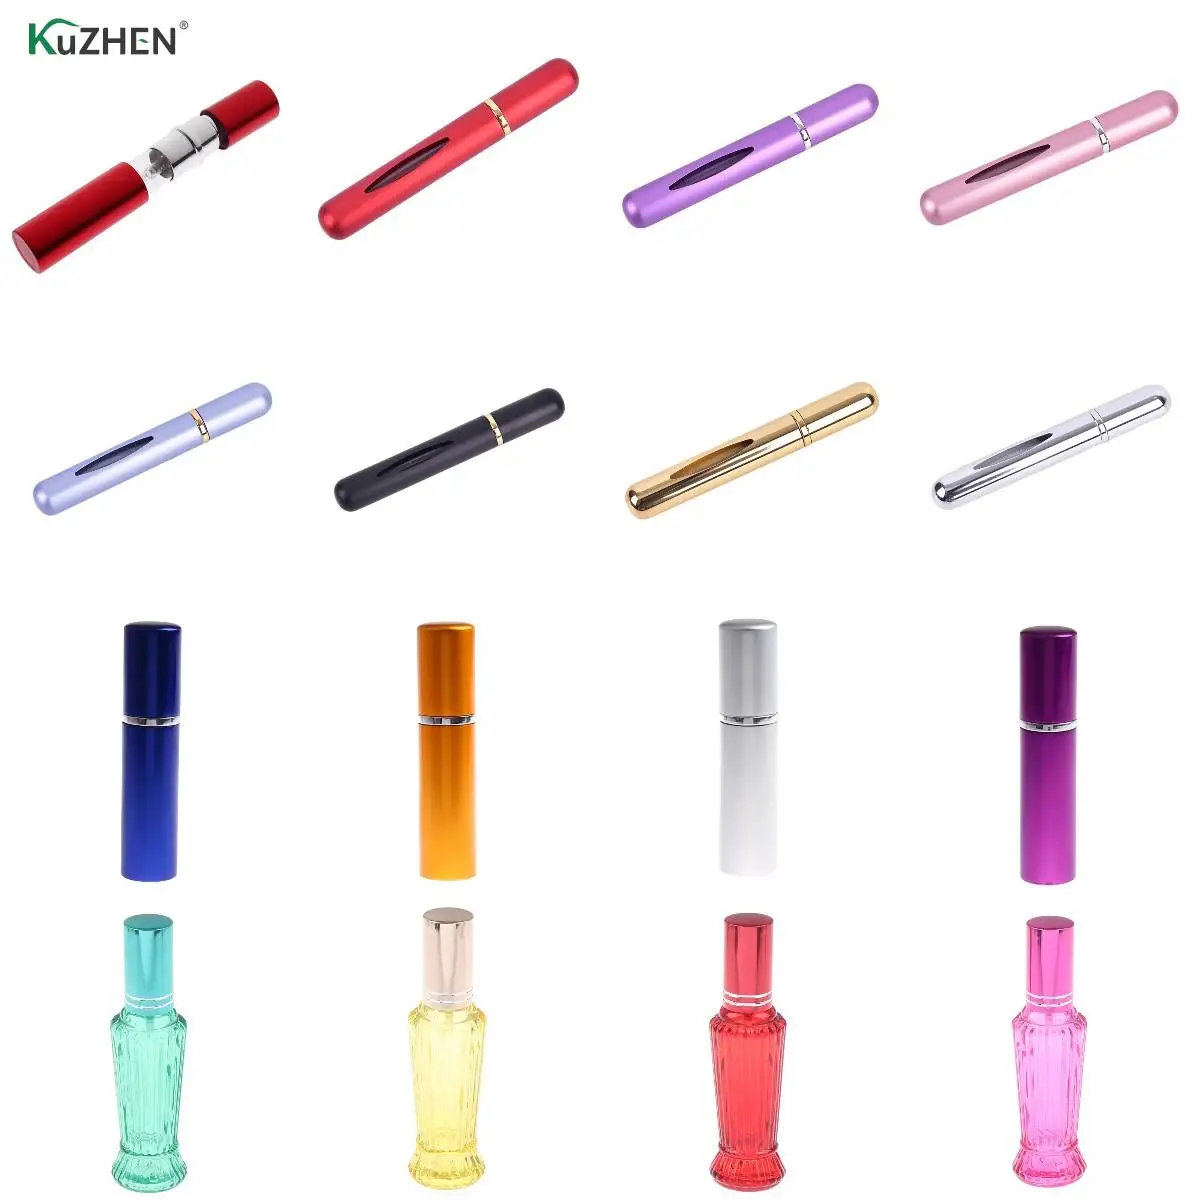 

1PCS Empty Cosmetic Containers Spray Atomizer Bottles Travel Tools 5/6/15ml Portable Refillable Perfume Bottle Spray Scent Pump